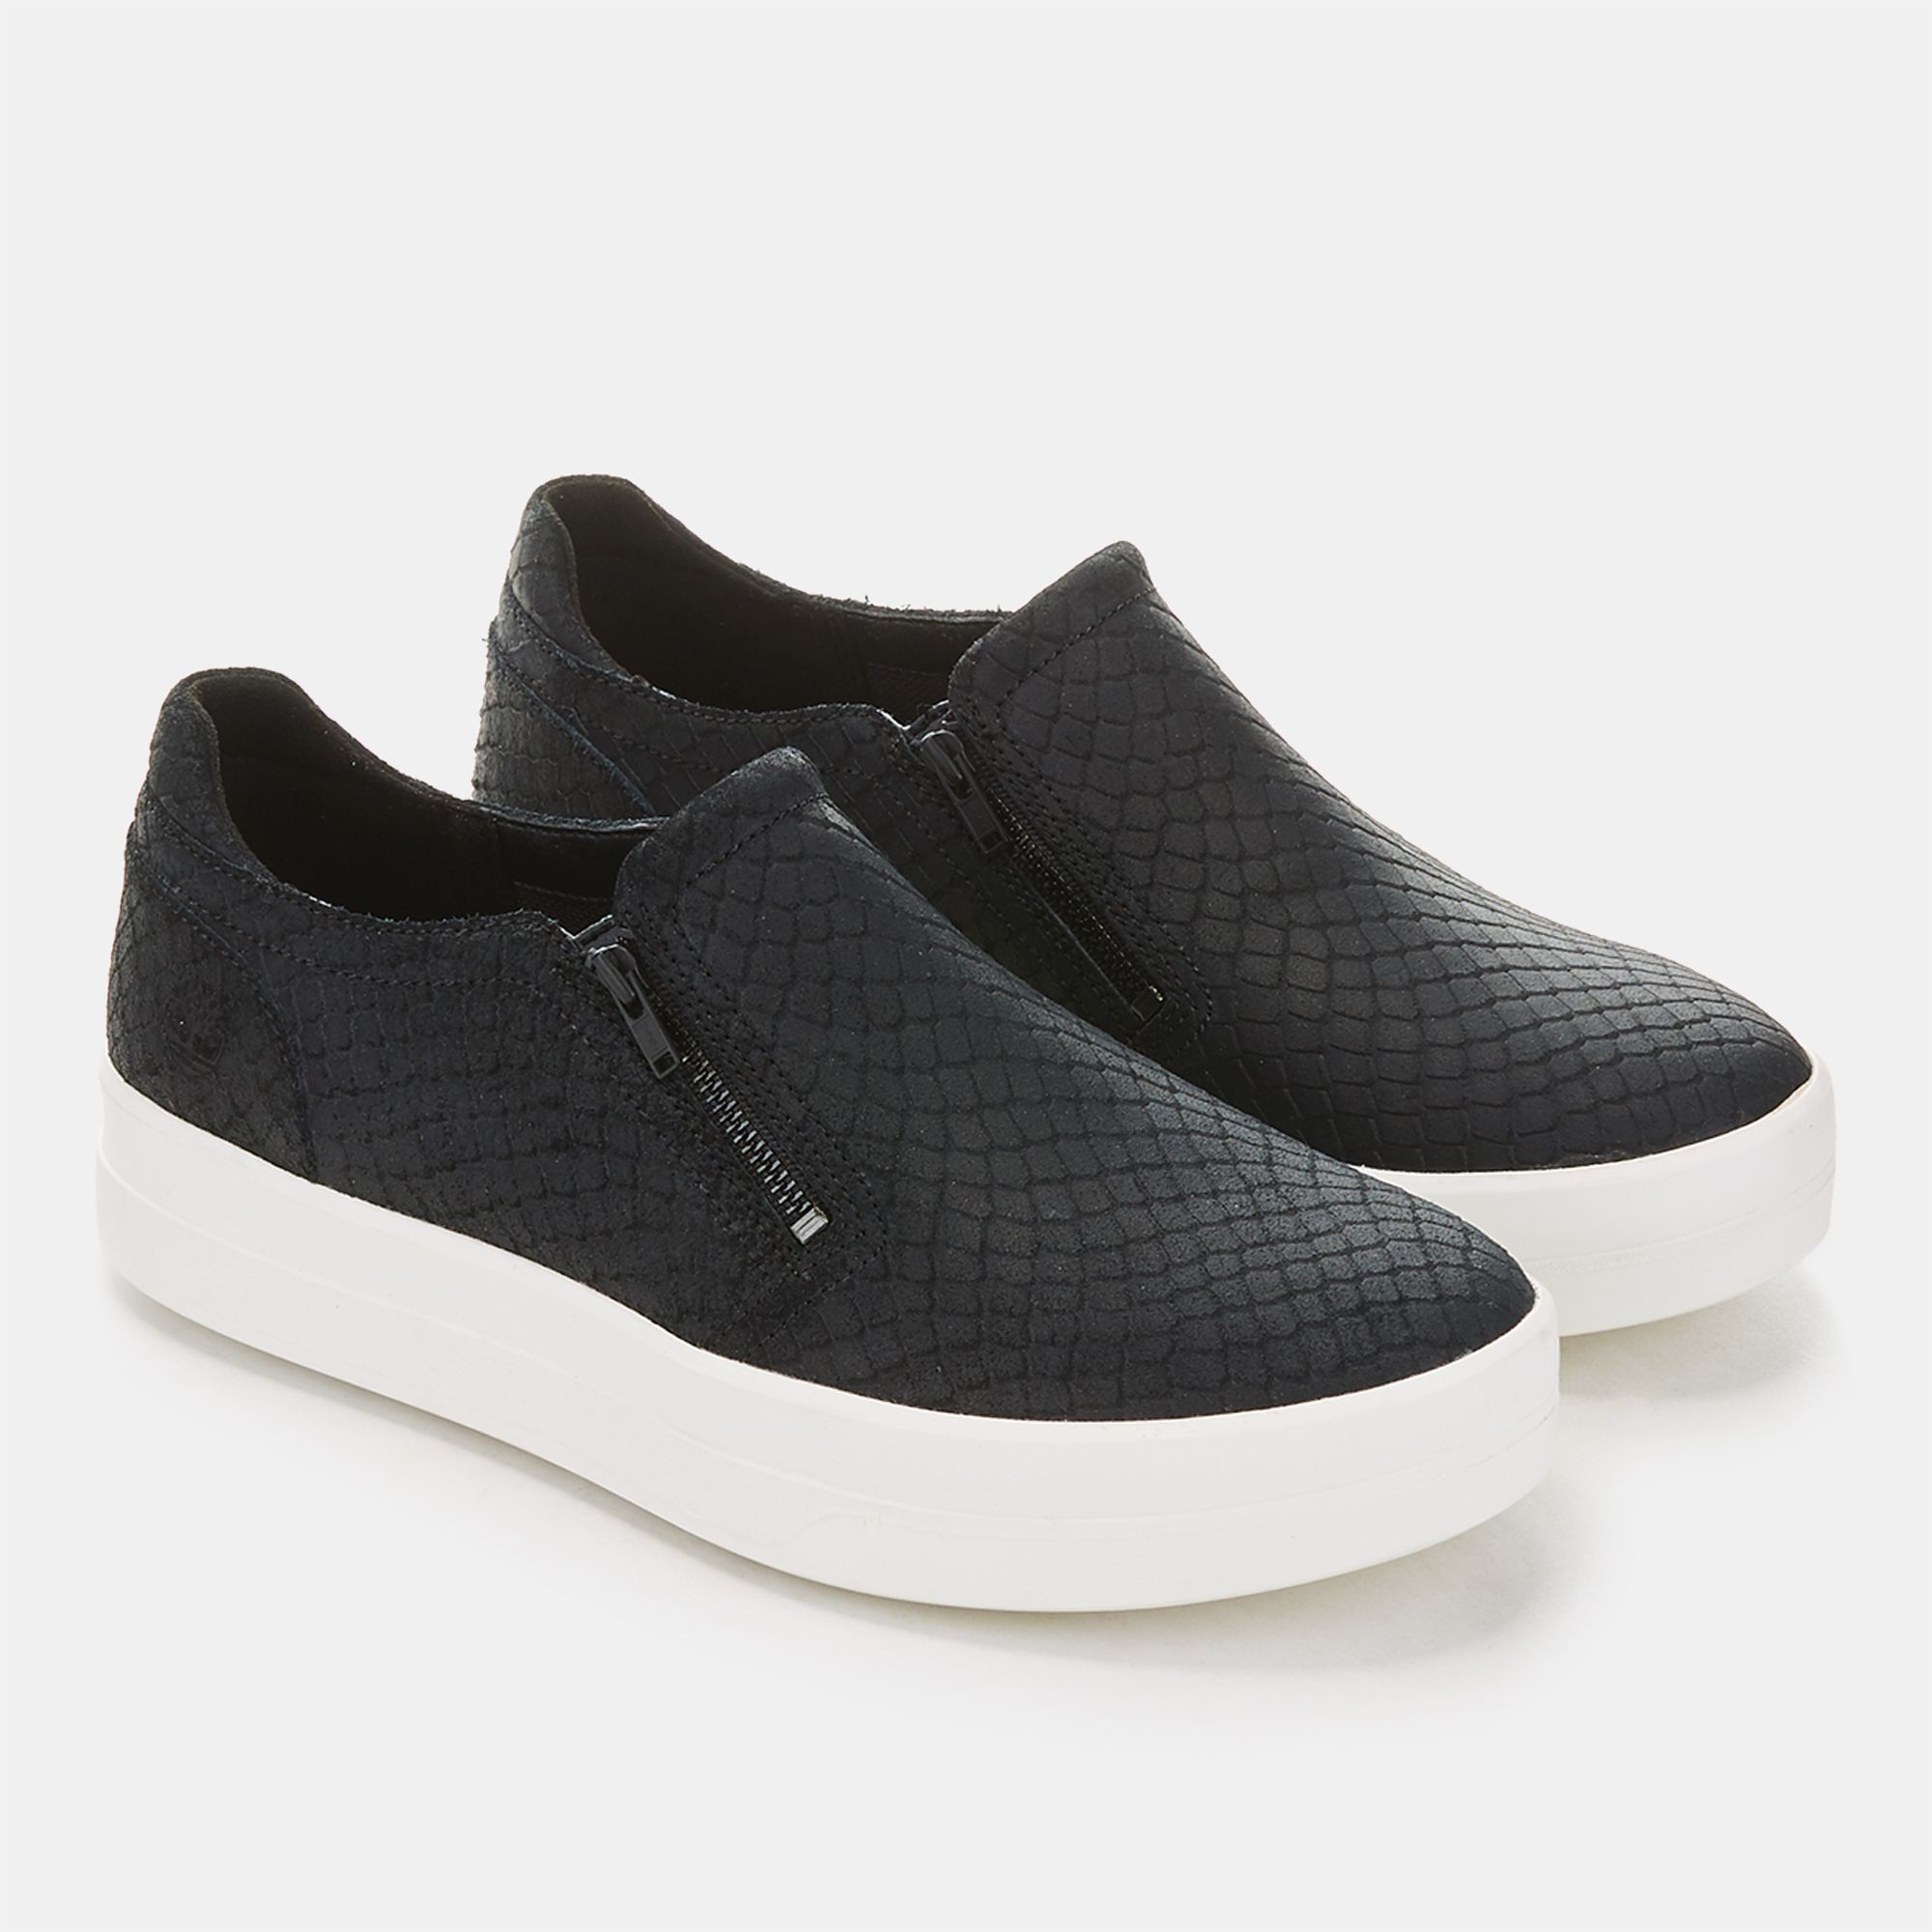 Shop Black Timberland Mayliss Slip On Shoe for Womens by Timberland | SSS